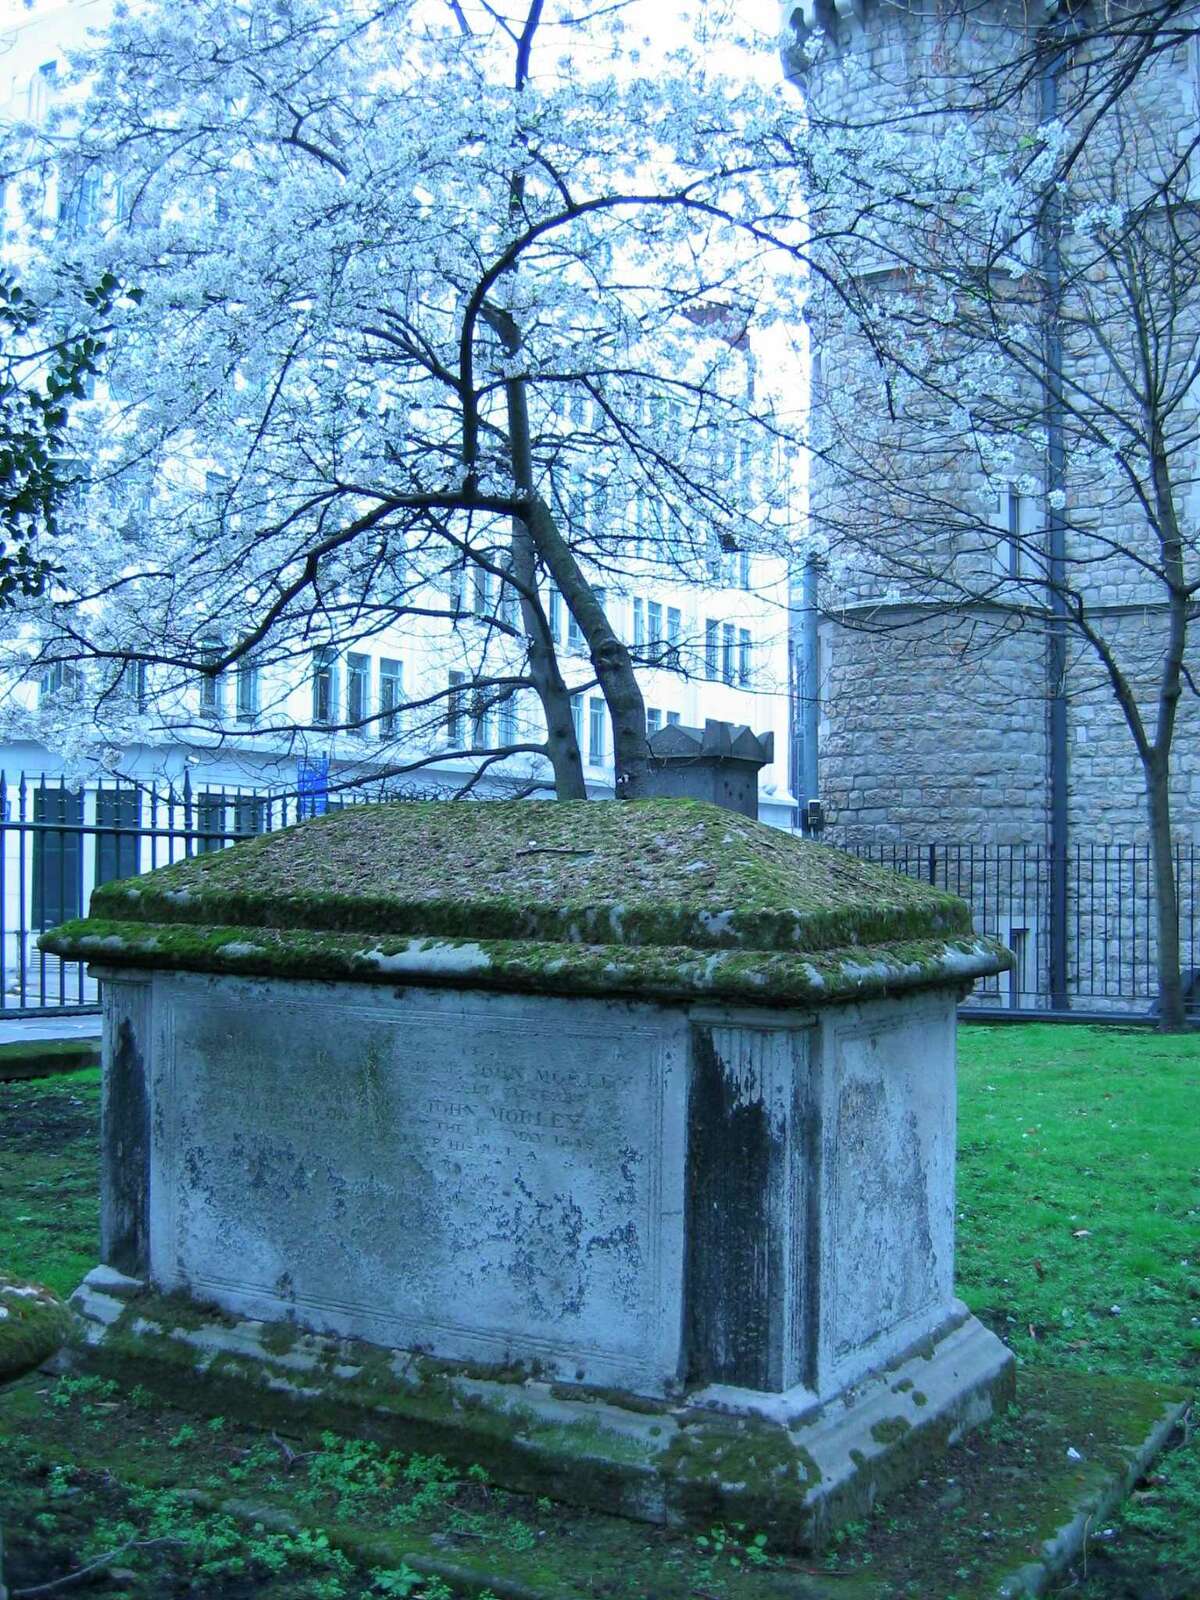 One of many ornate tombs at Bunhill Fields, which was set aside as a cemetery for victims of the Great Plague of 1665. London